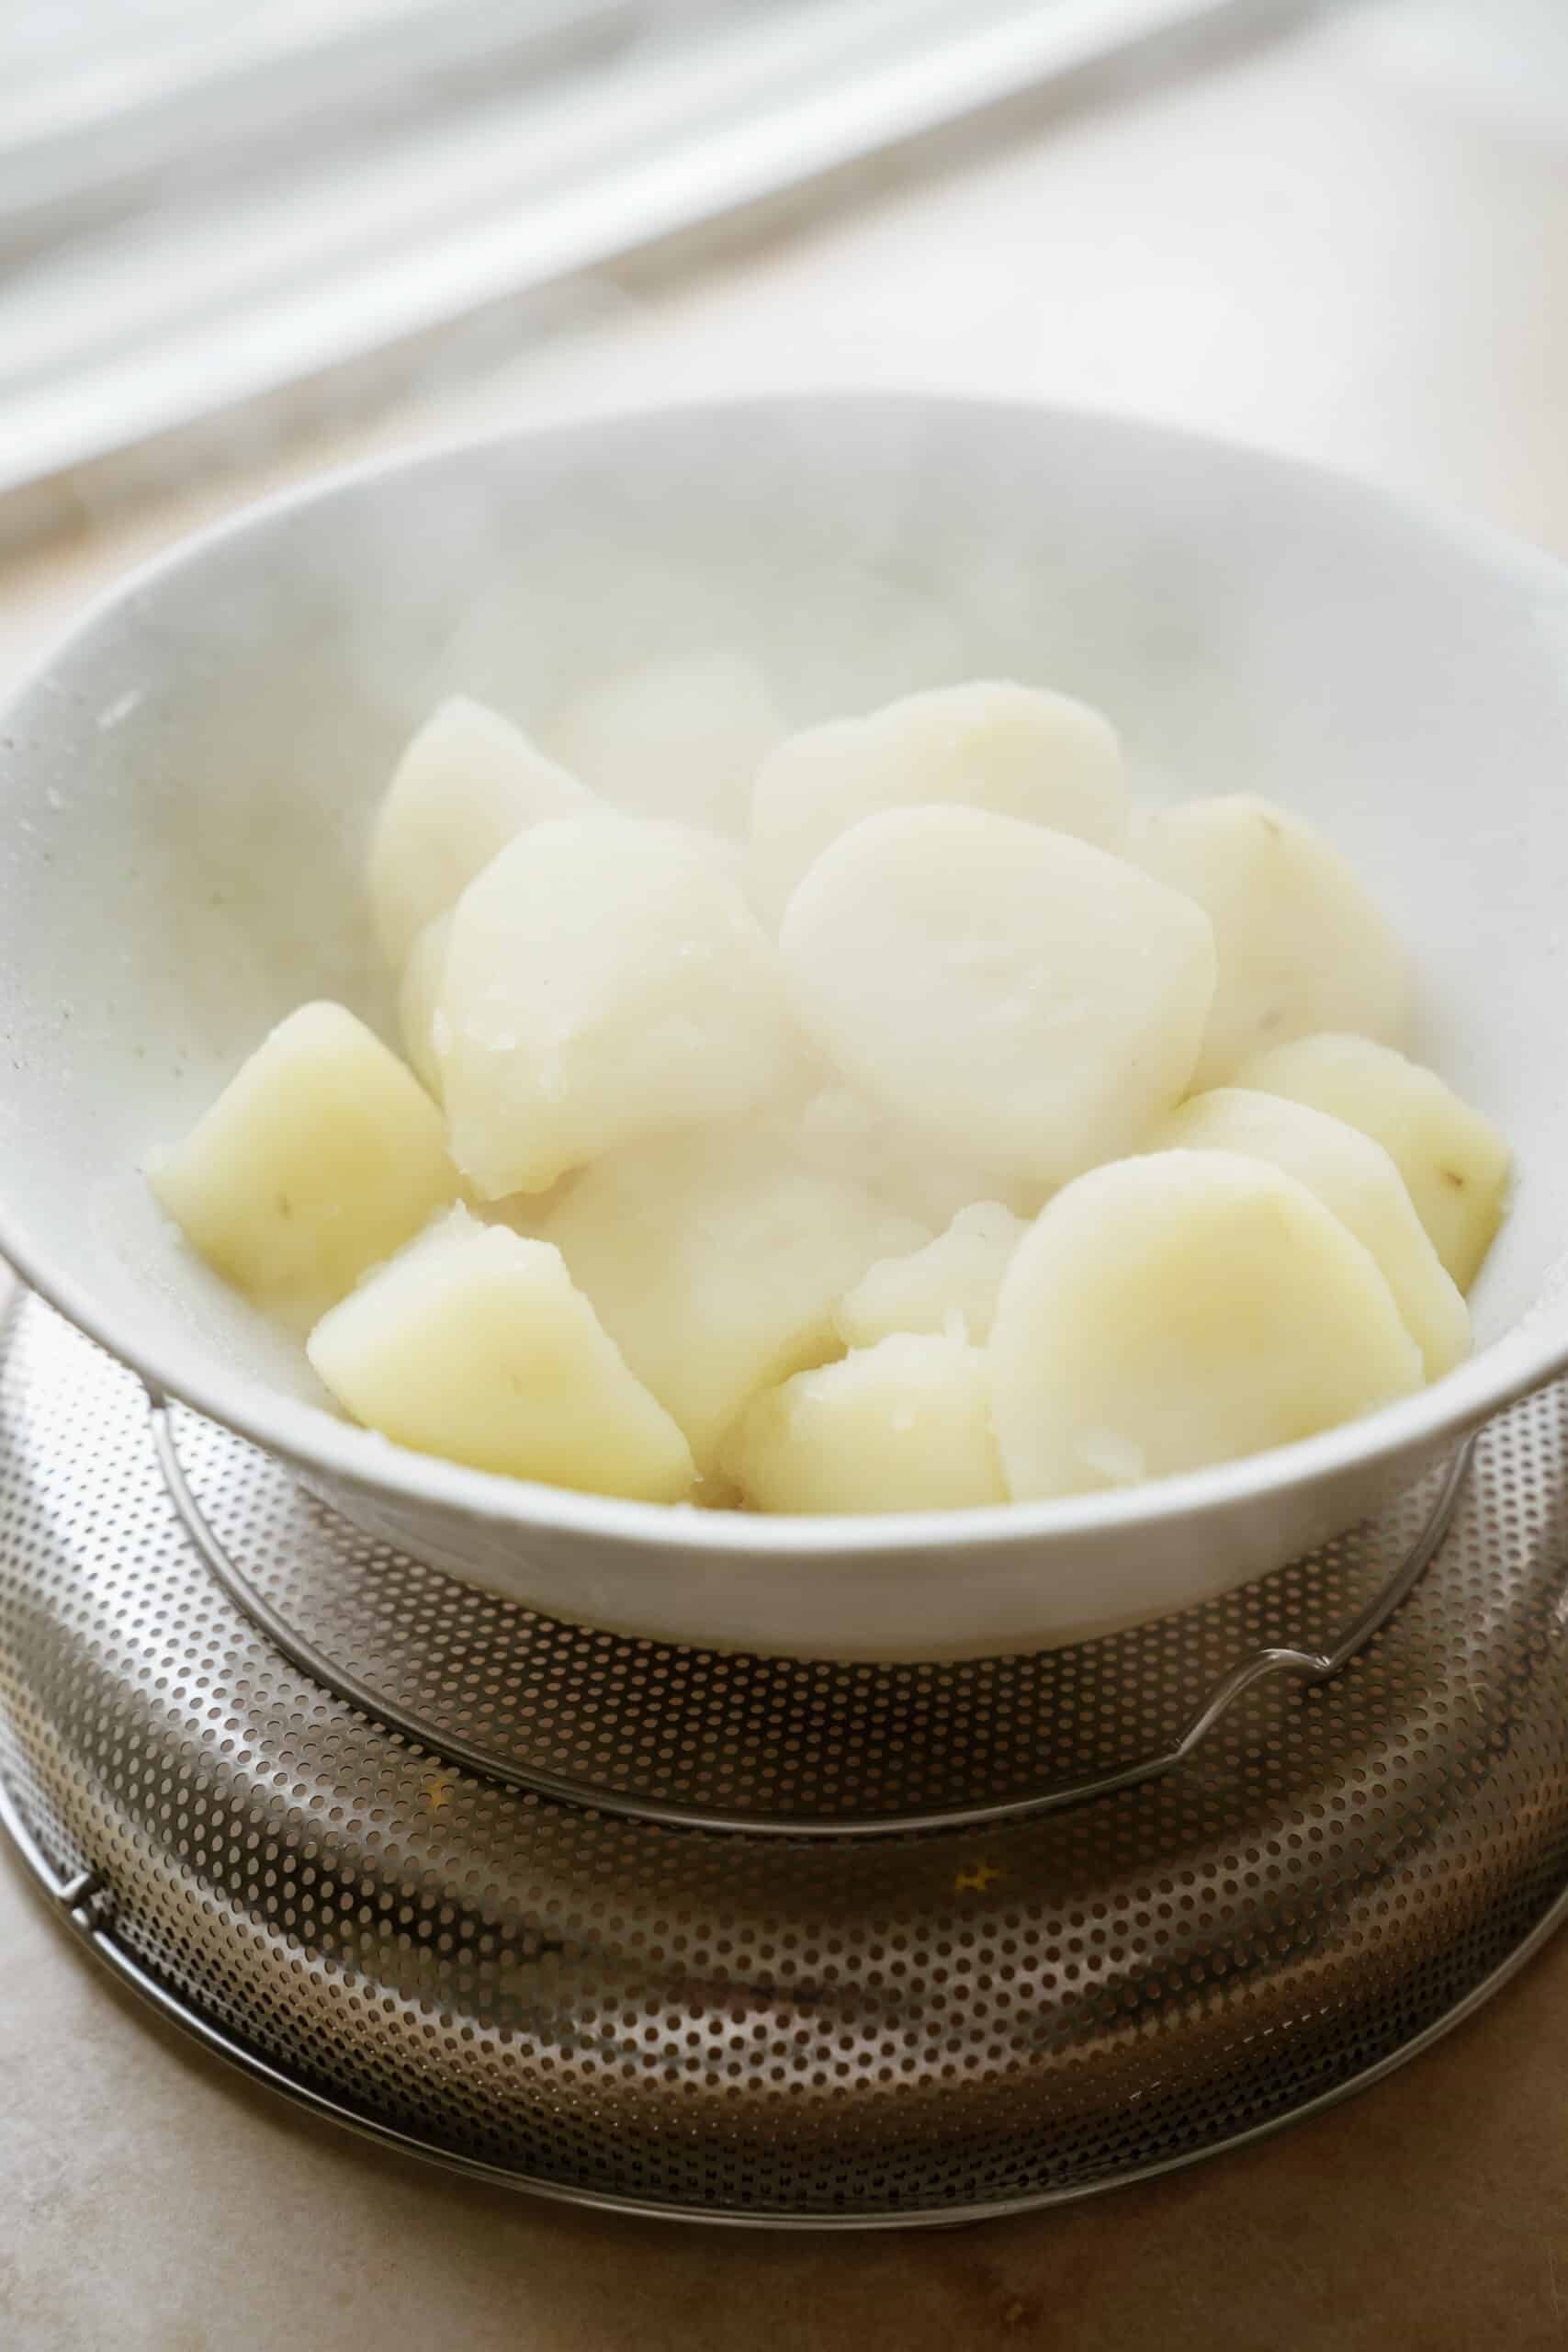 Cooked potatoes in a white bowl on counter